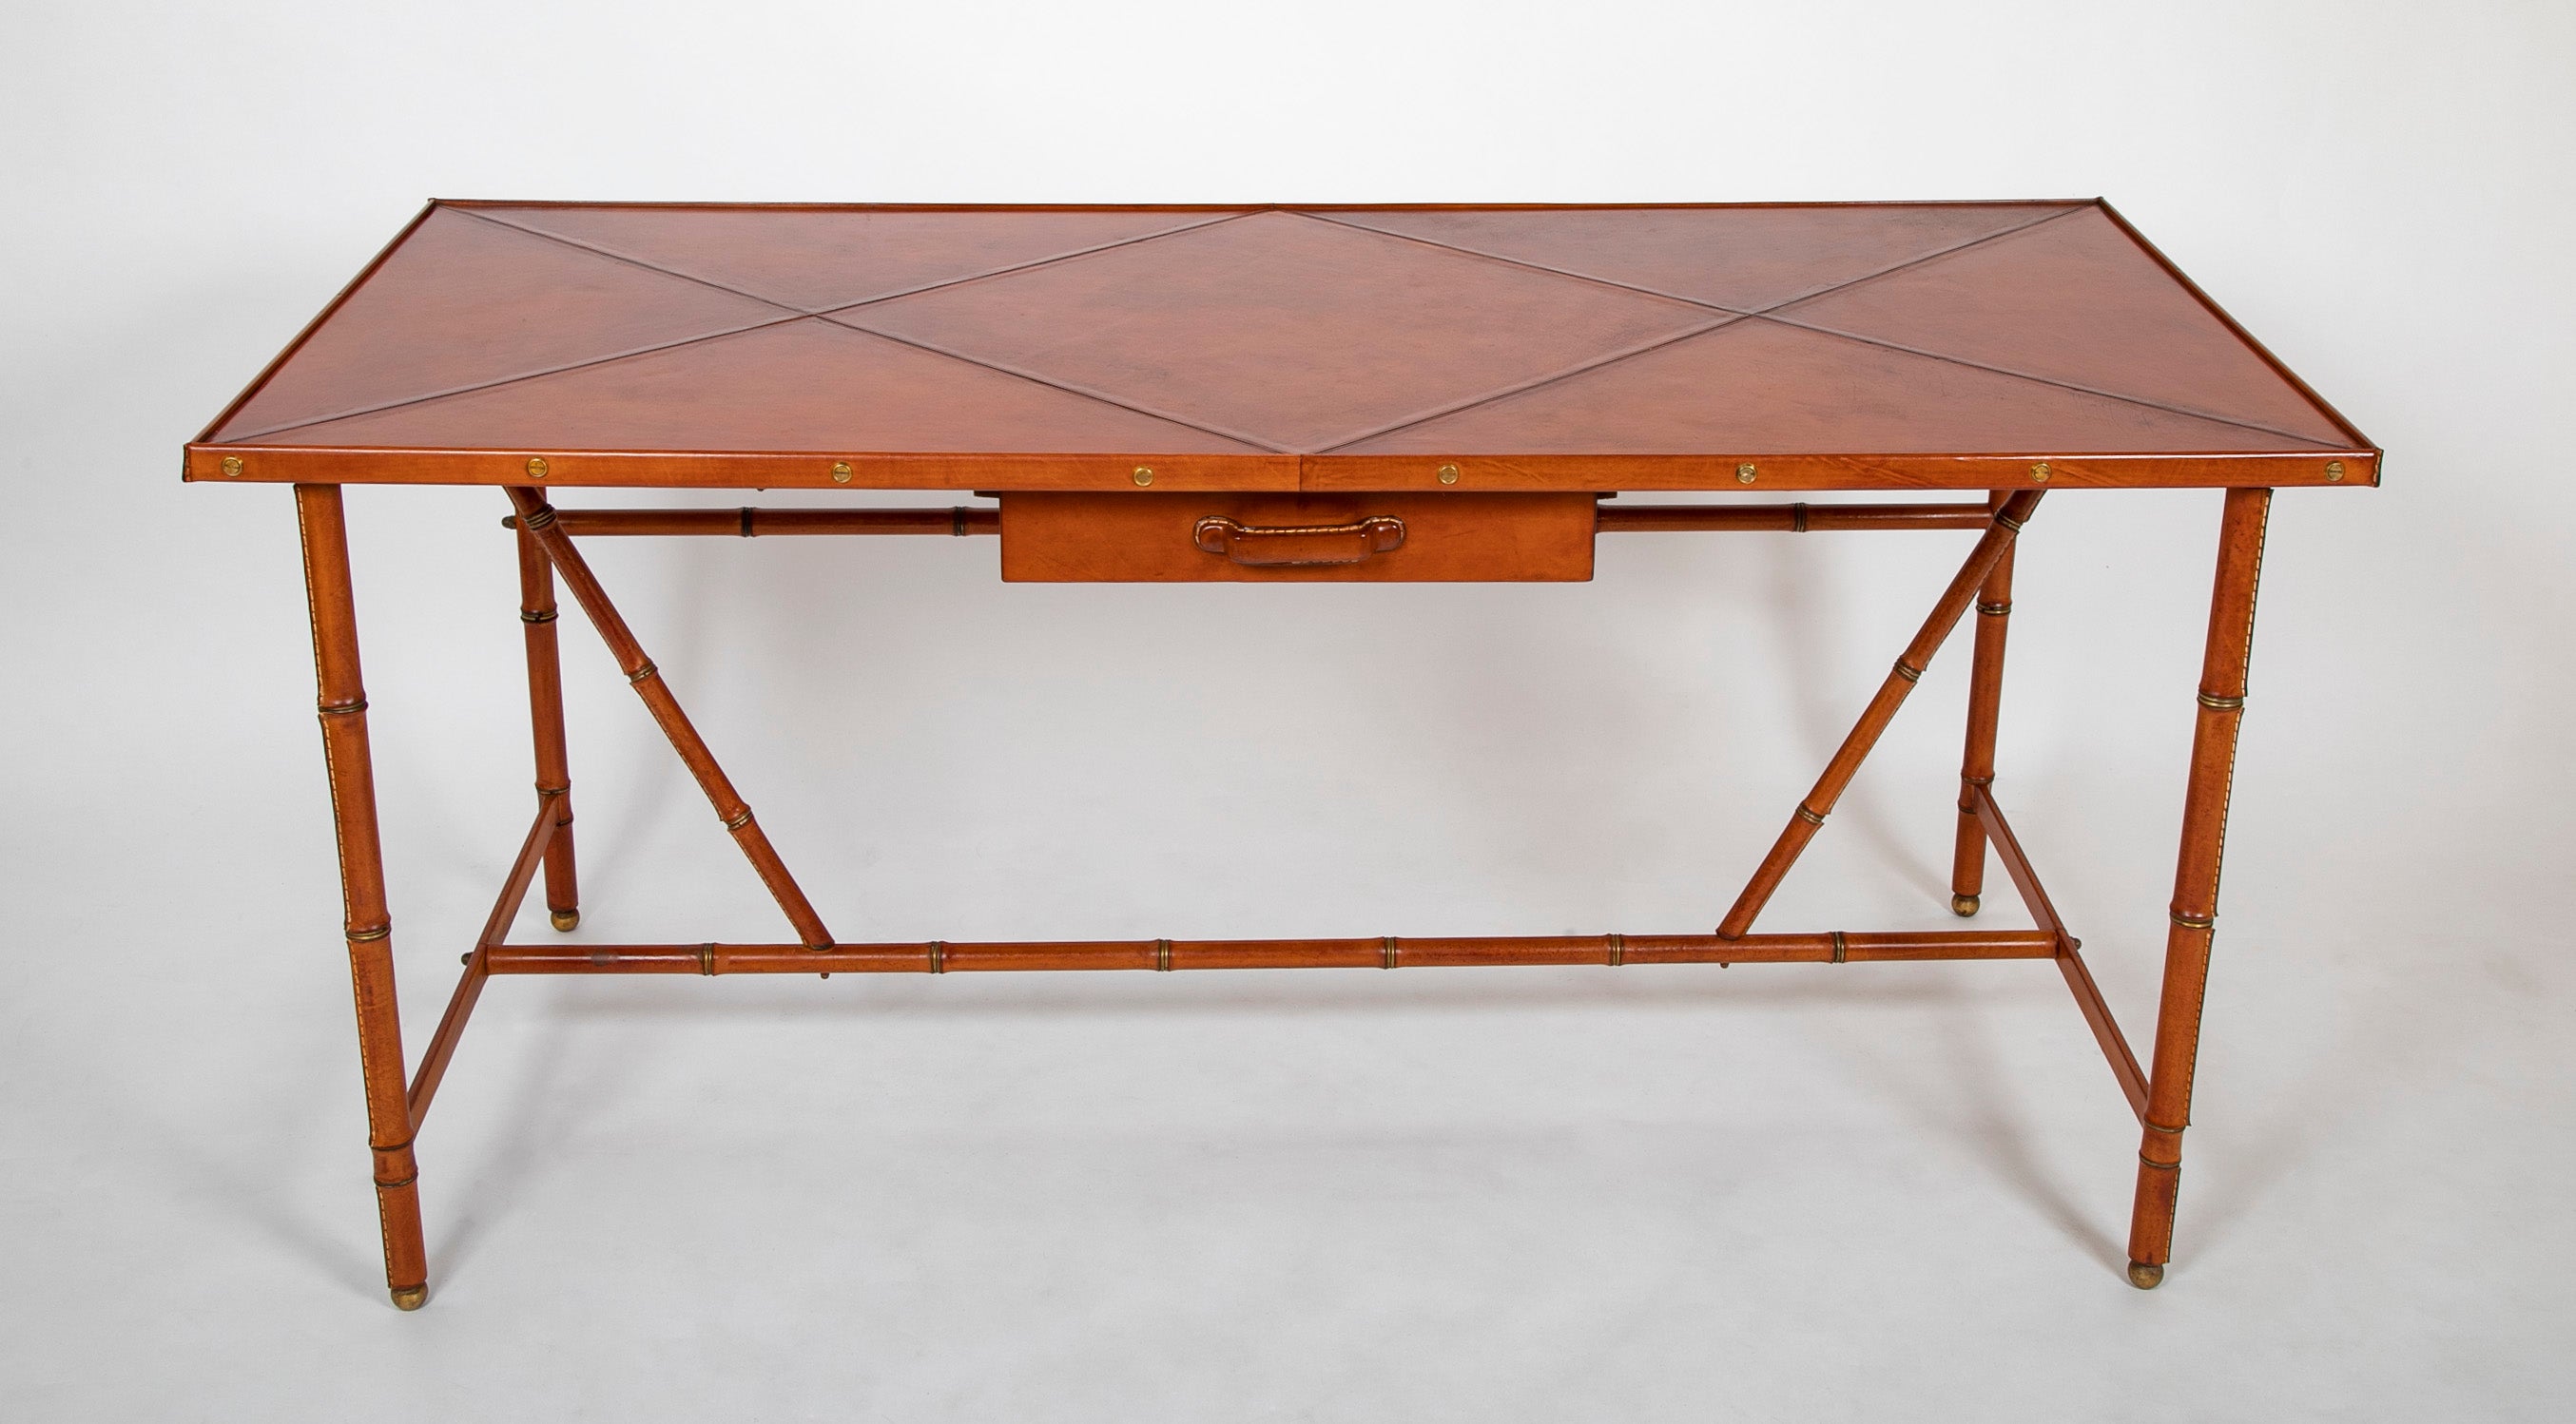 Jacques Adnet Desk of Saddle Stitched Leather over Steel